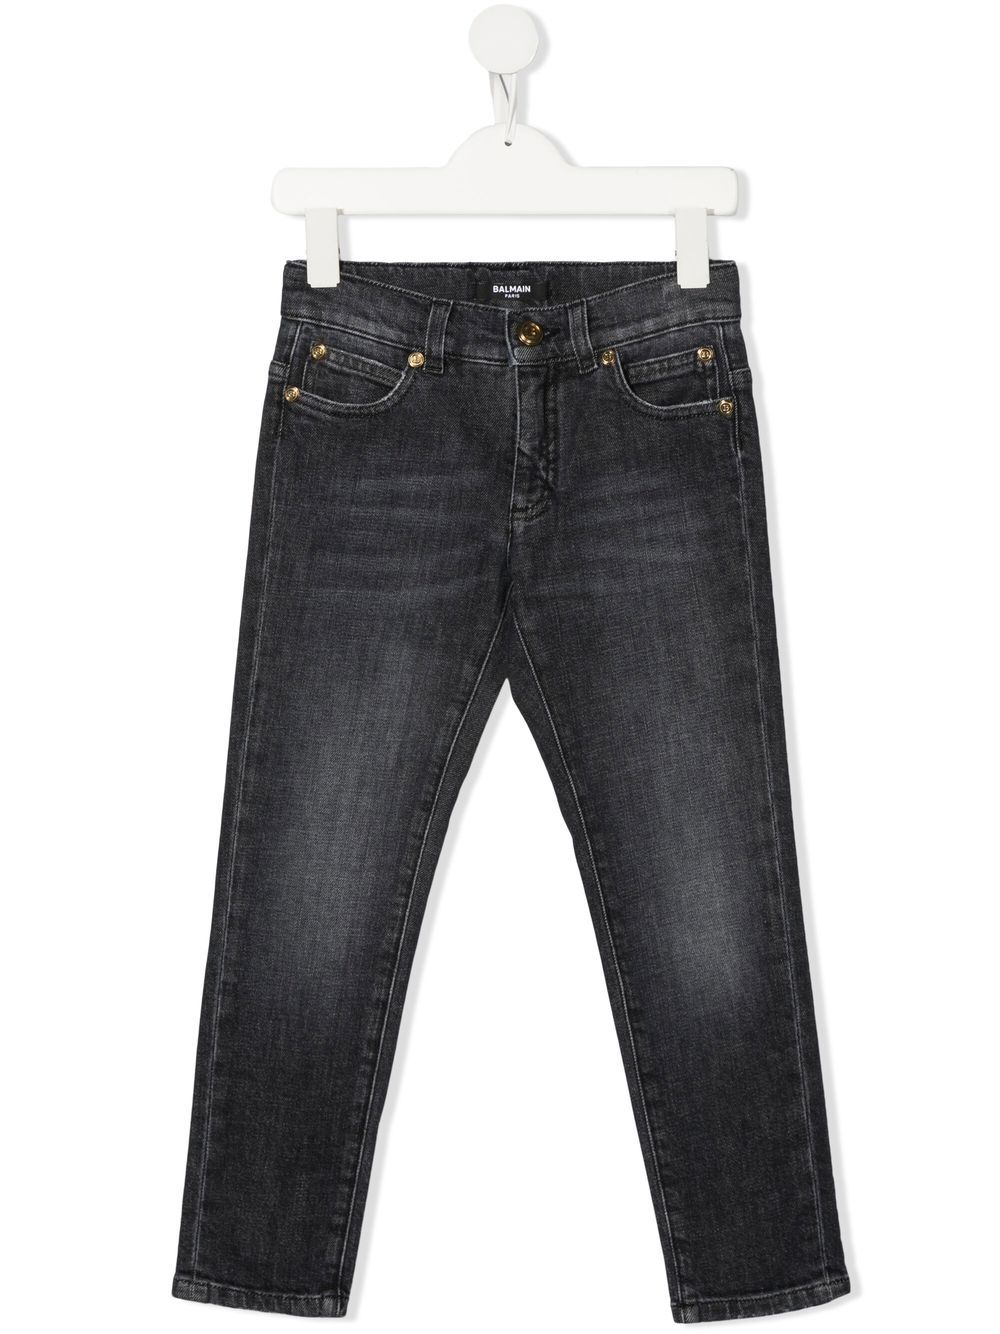 Trendy Balmain Jeans for Men: Stylish and Comfortable